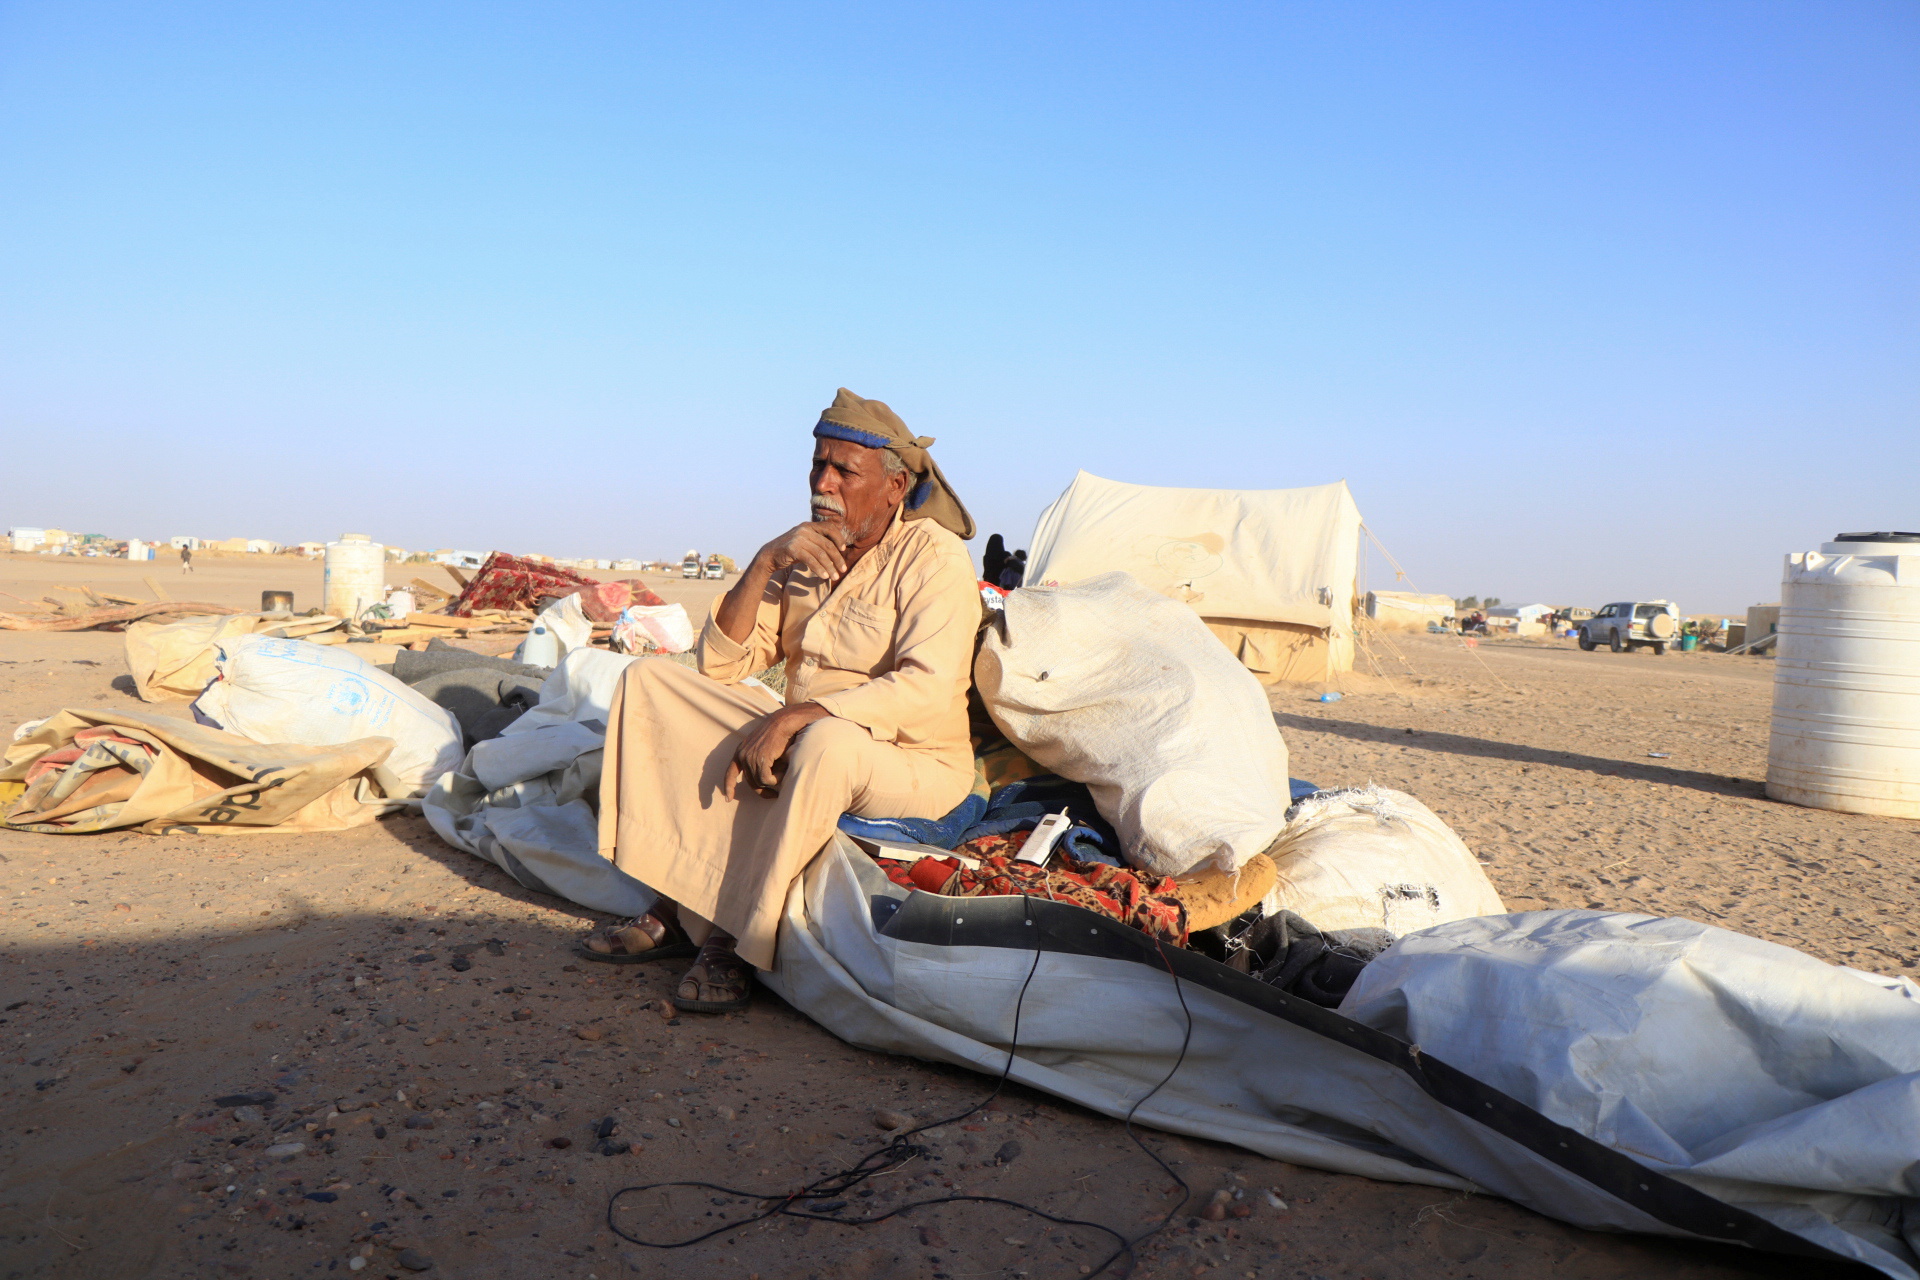 A man sits on belongings after arriving in a camp for internally displaced people (IDPs) in Marib, Yemen